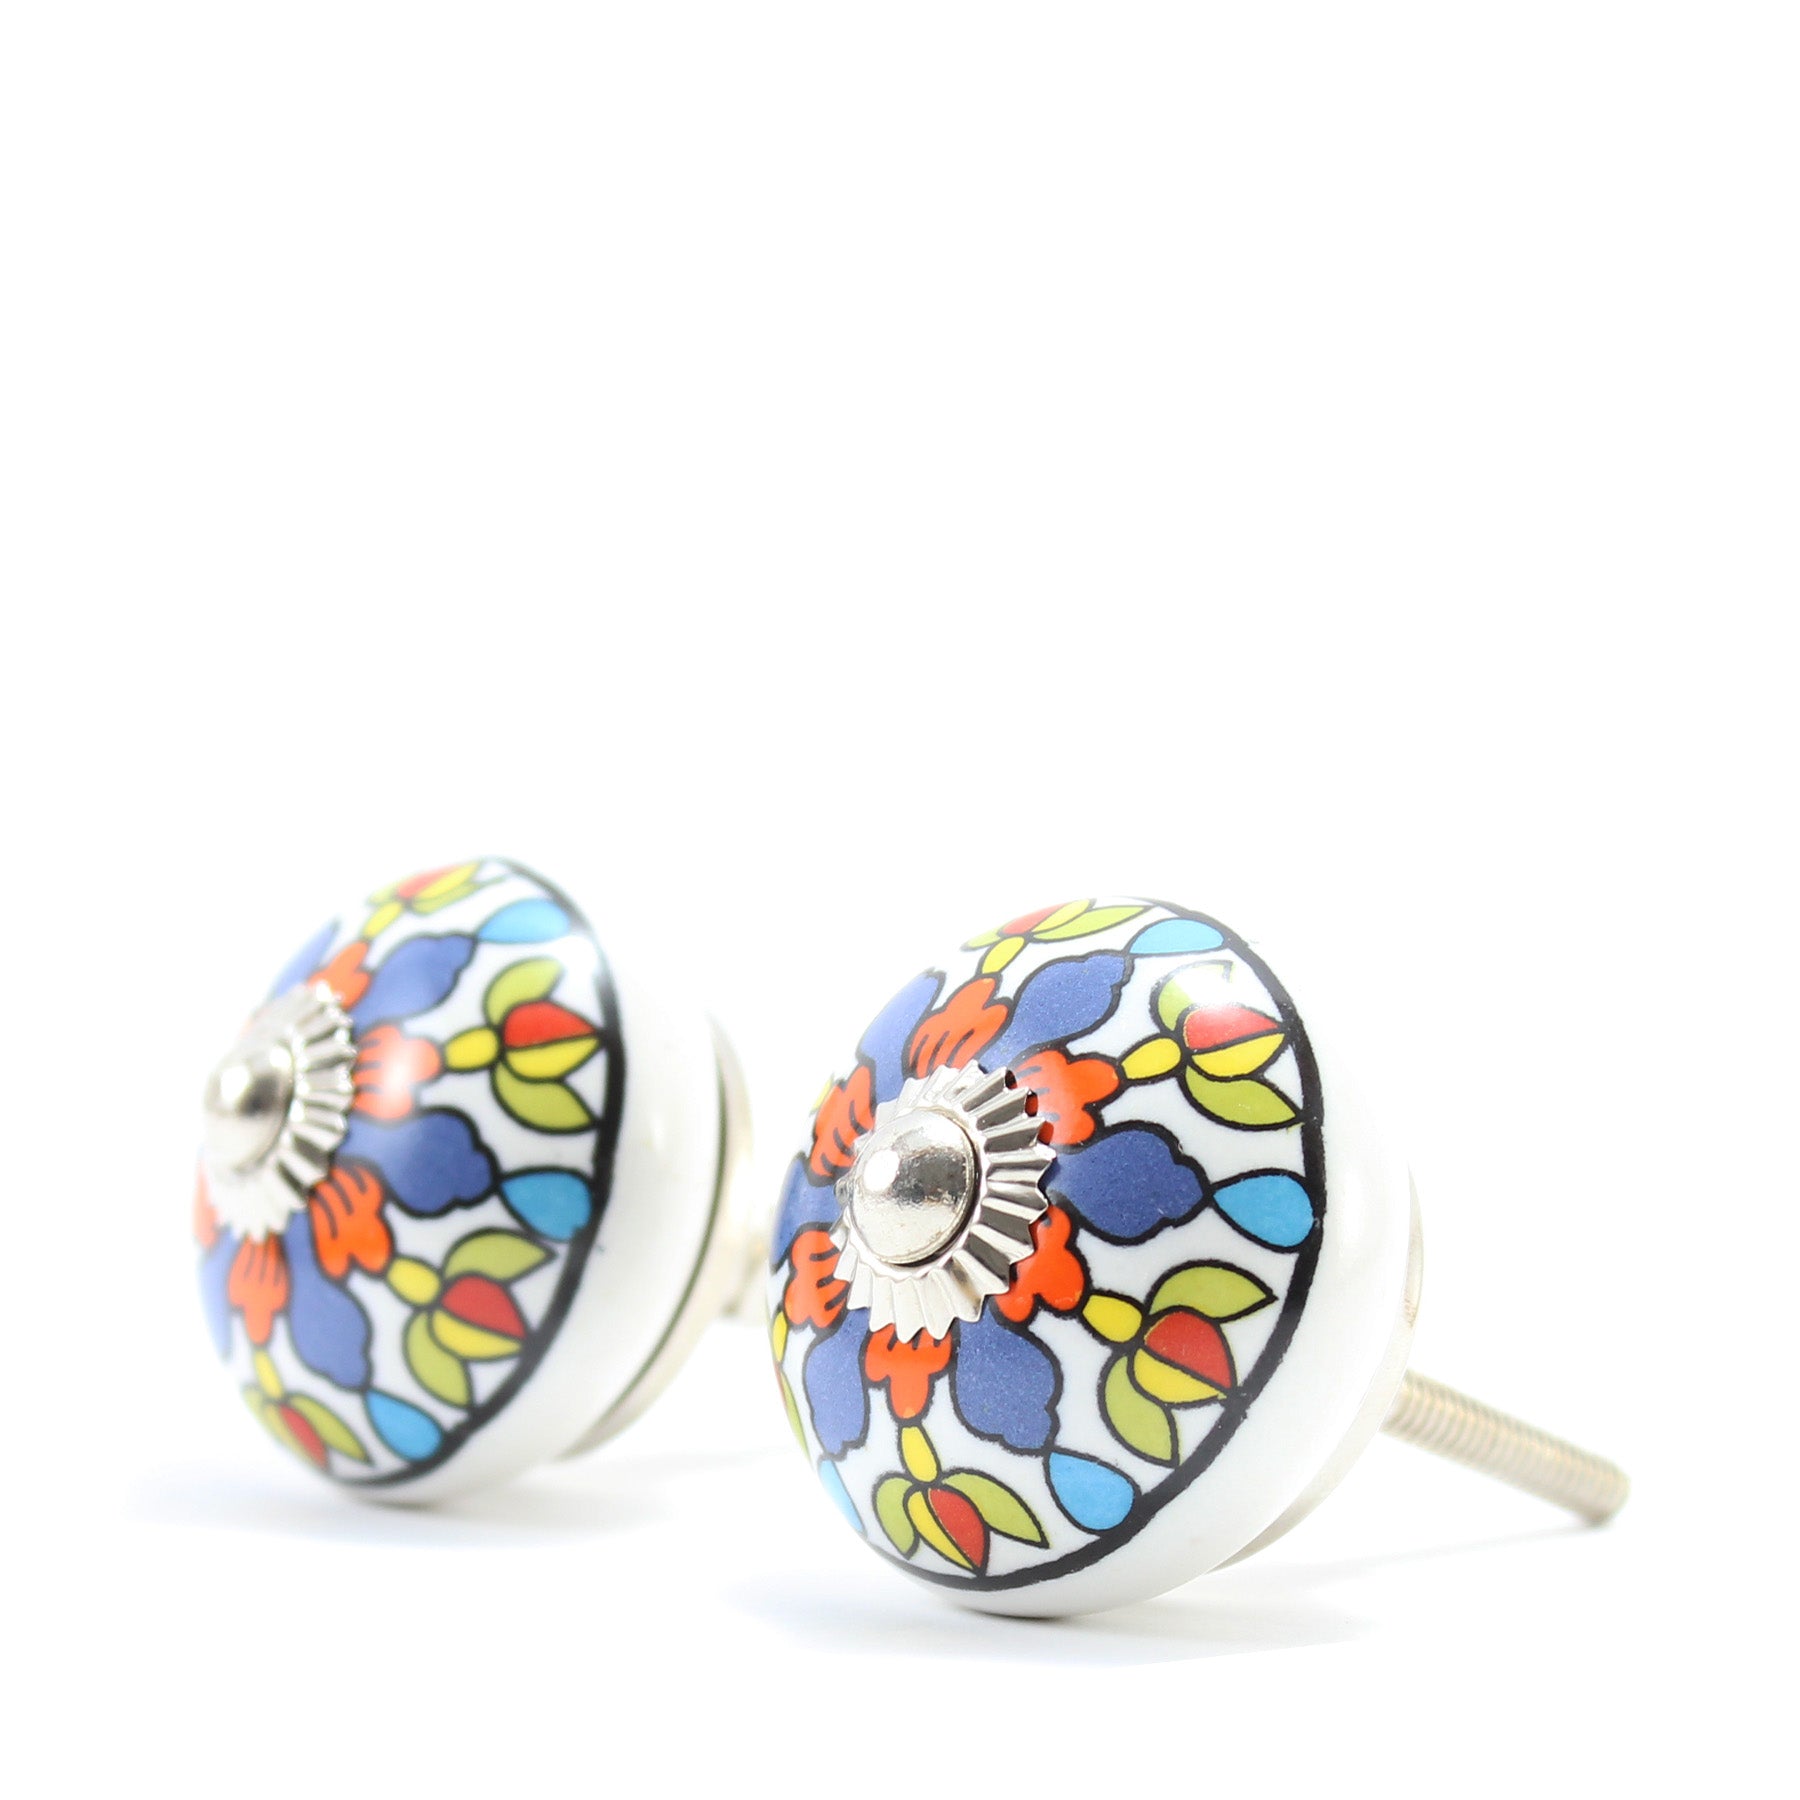 Handcrafted Ceramic Knobs IV